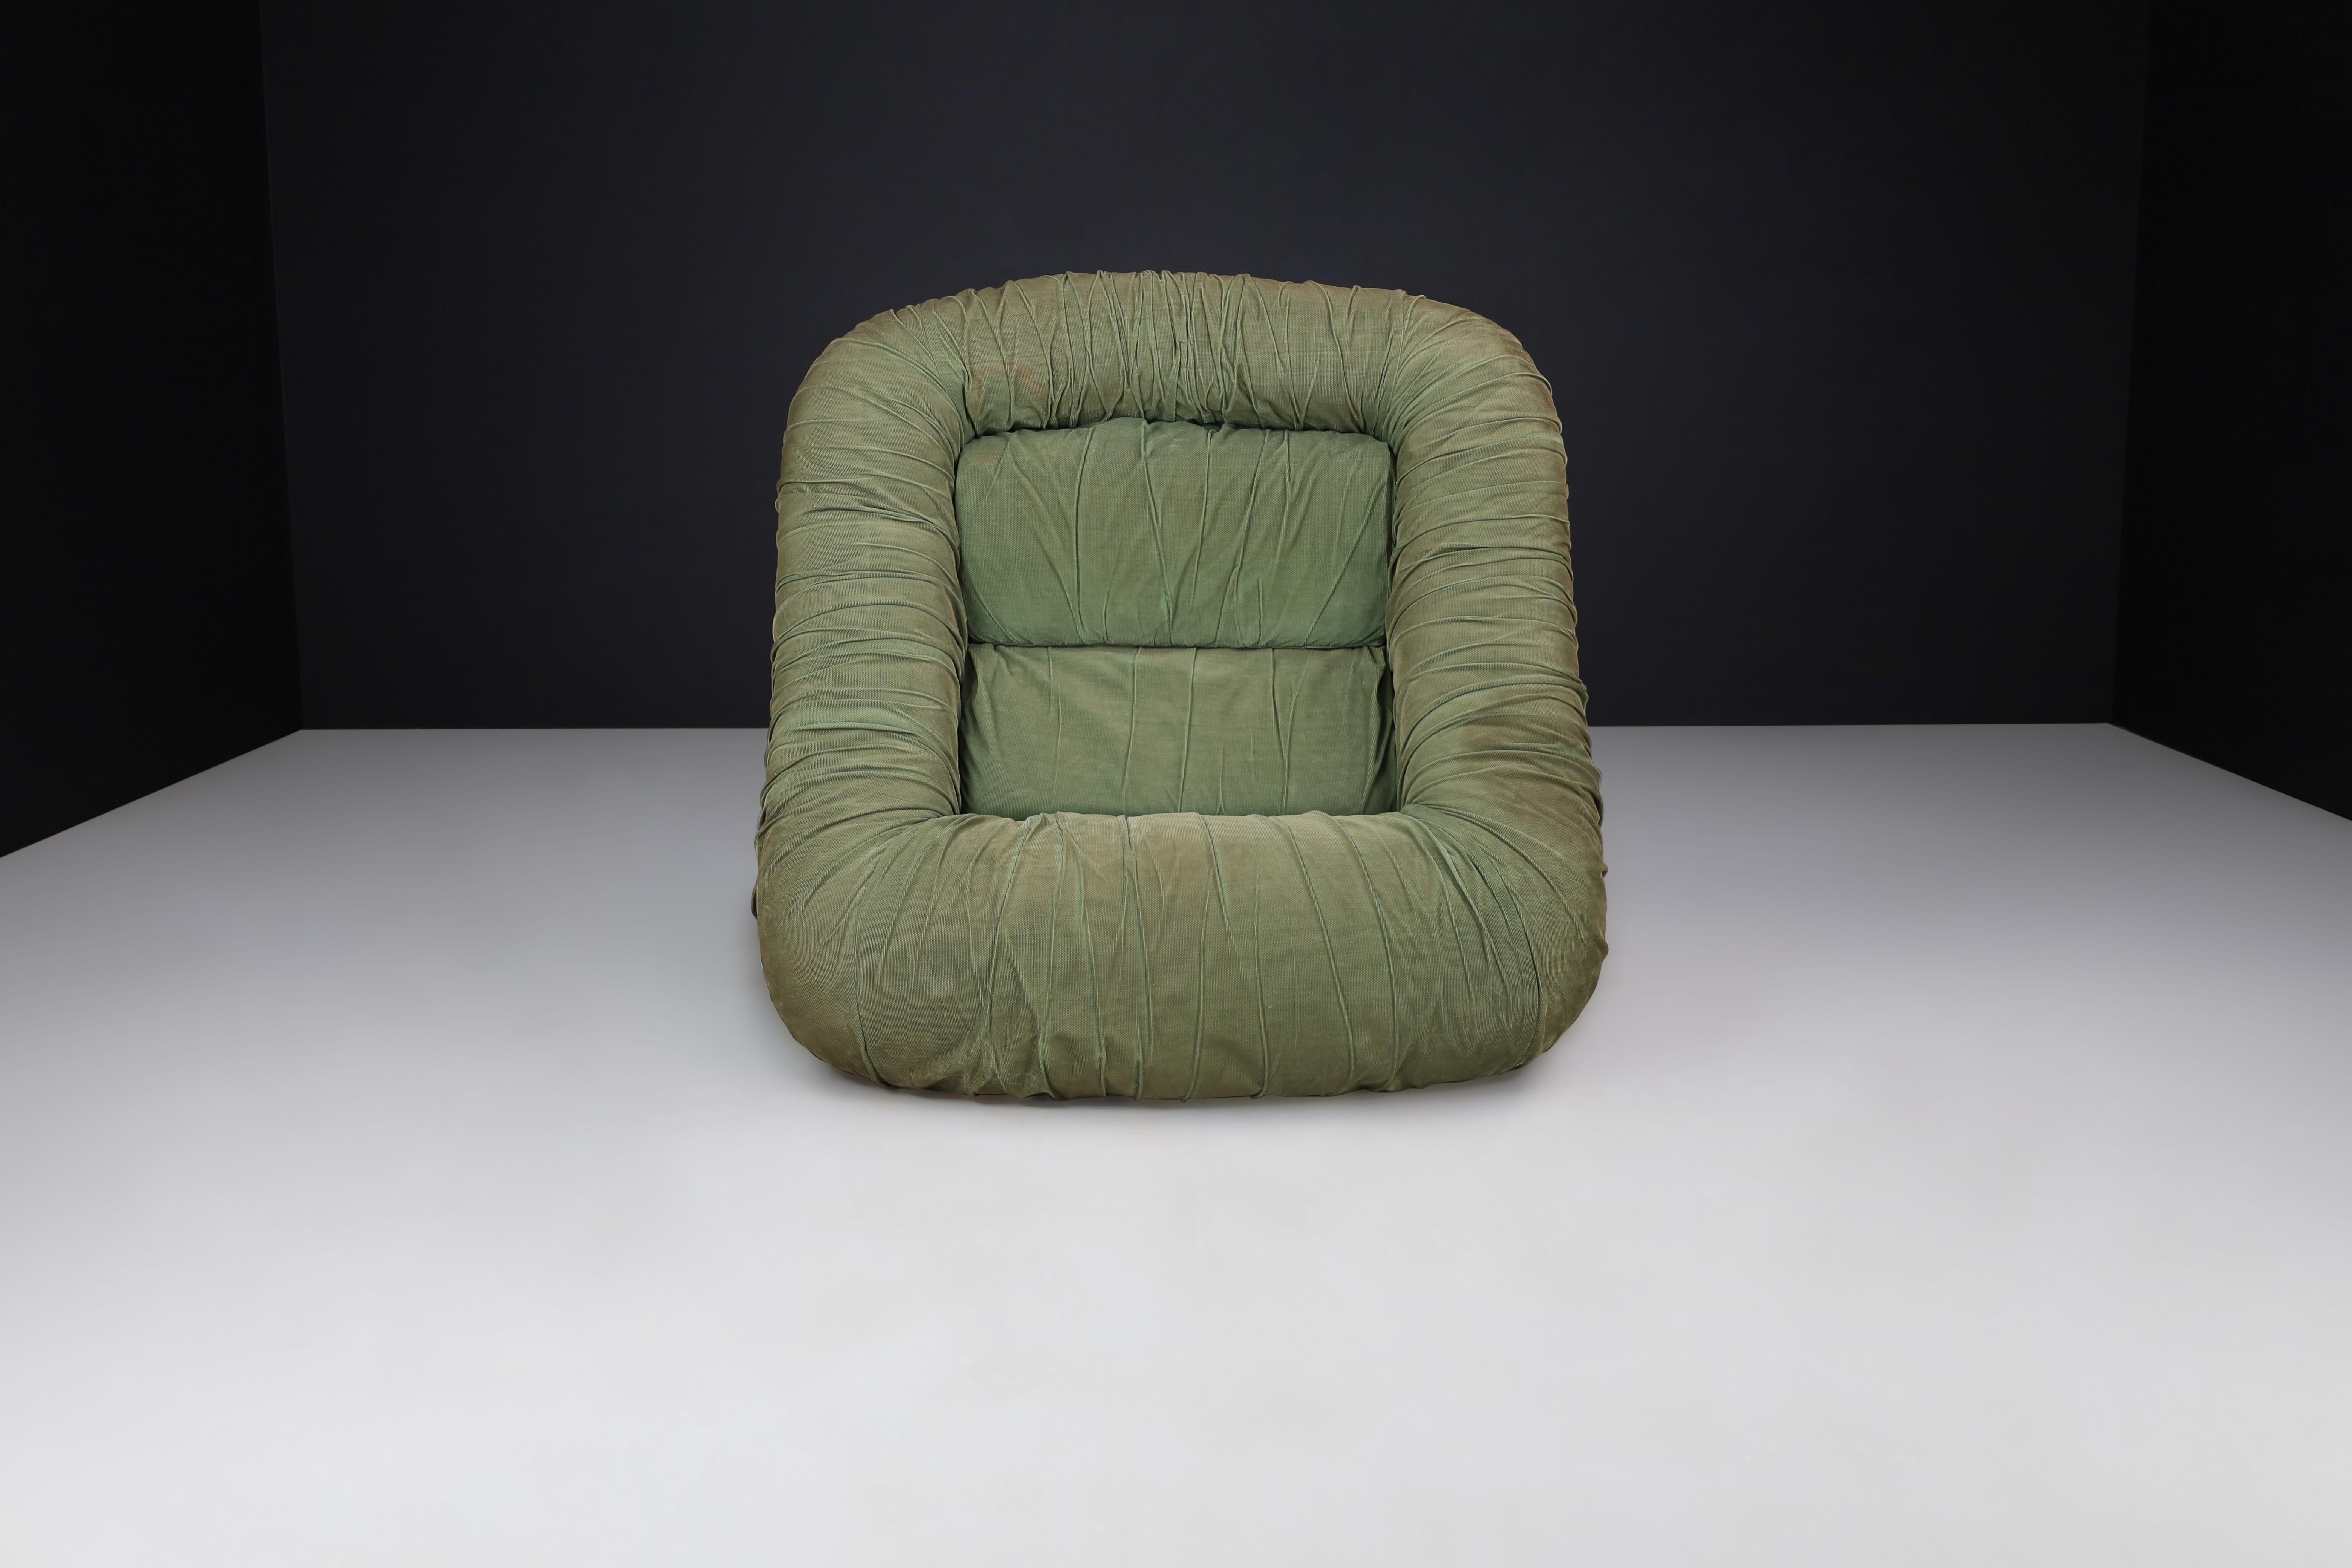 De Pas, D’urbino, and Lomazzi for Dall’Oca Lounge Chair, Italy, 1970s For Sale 4